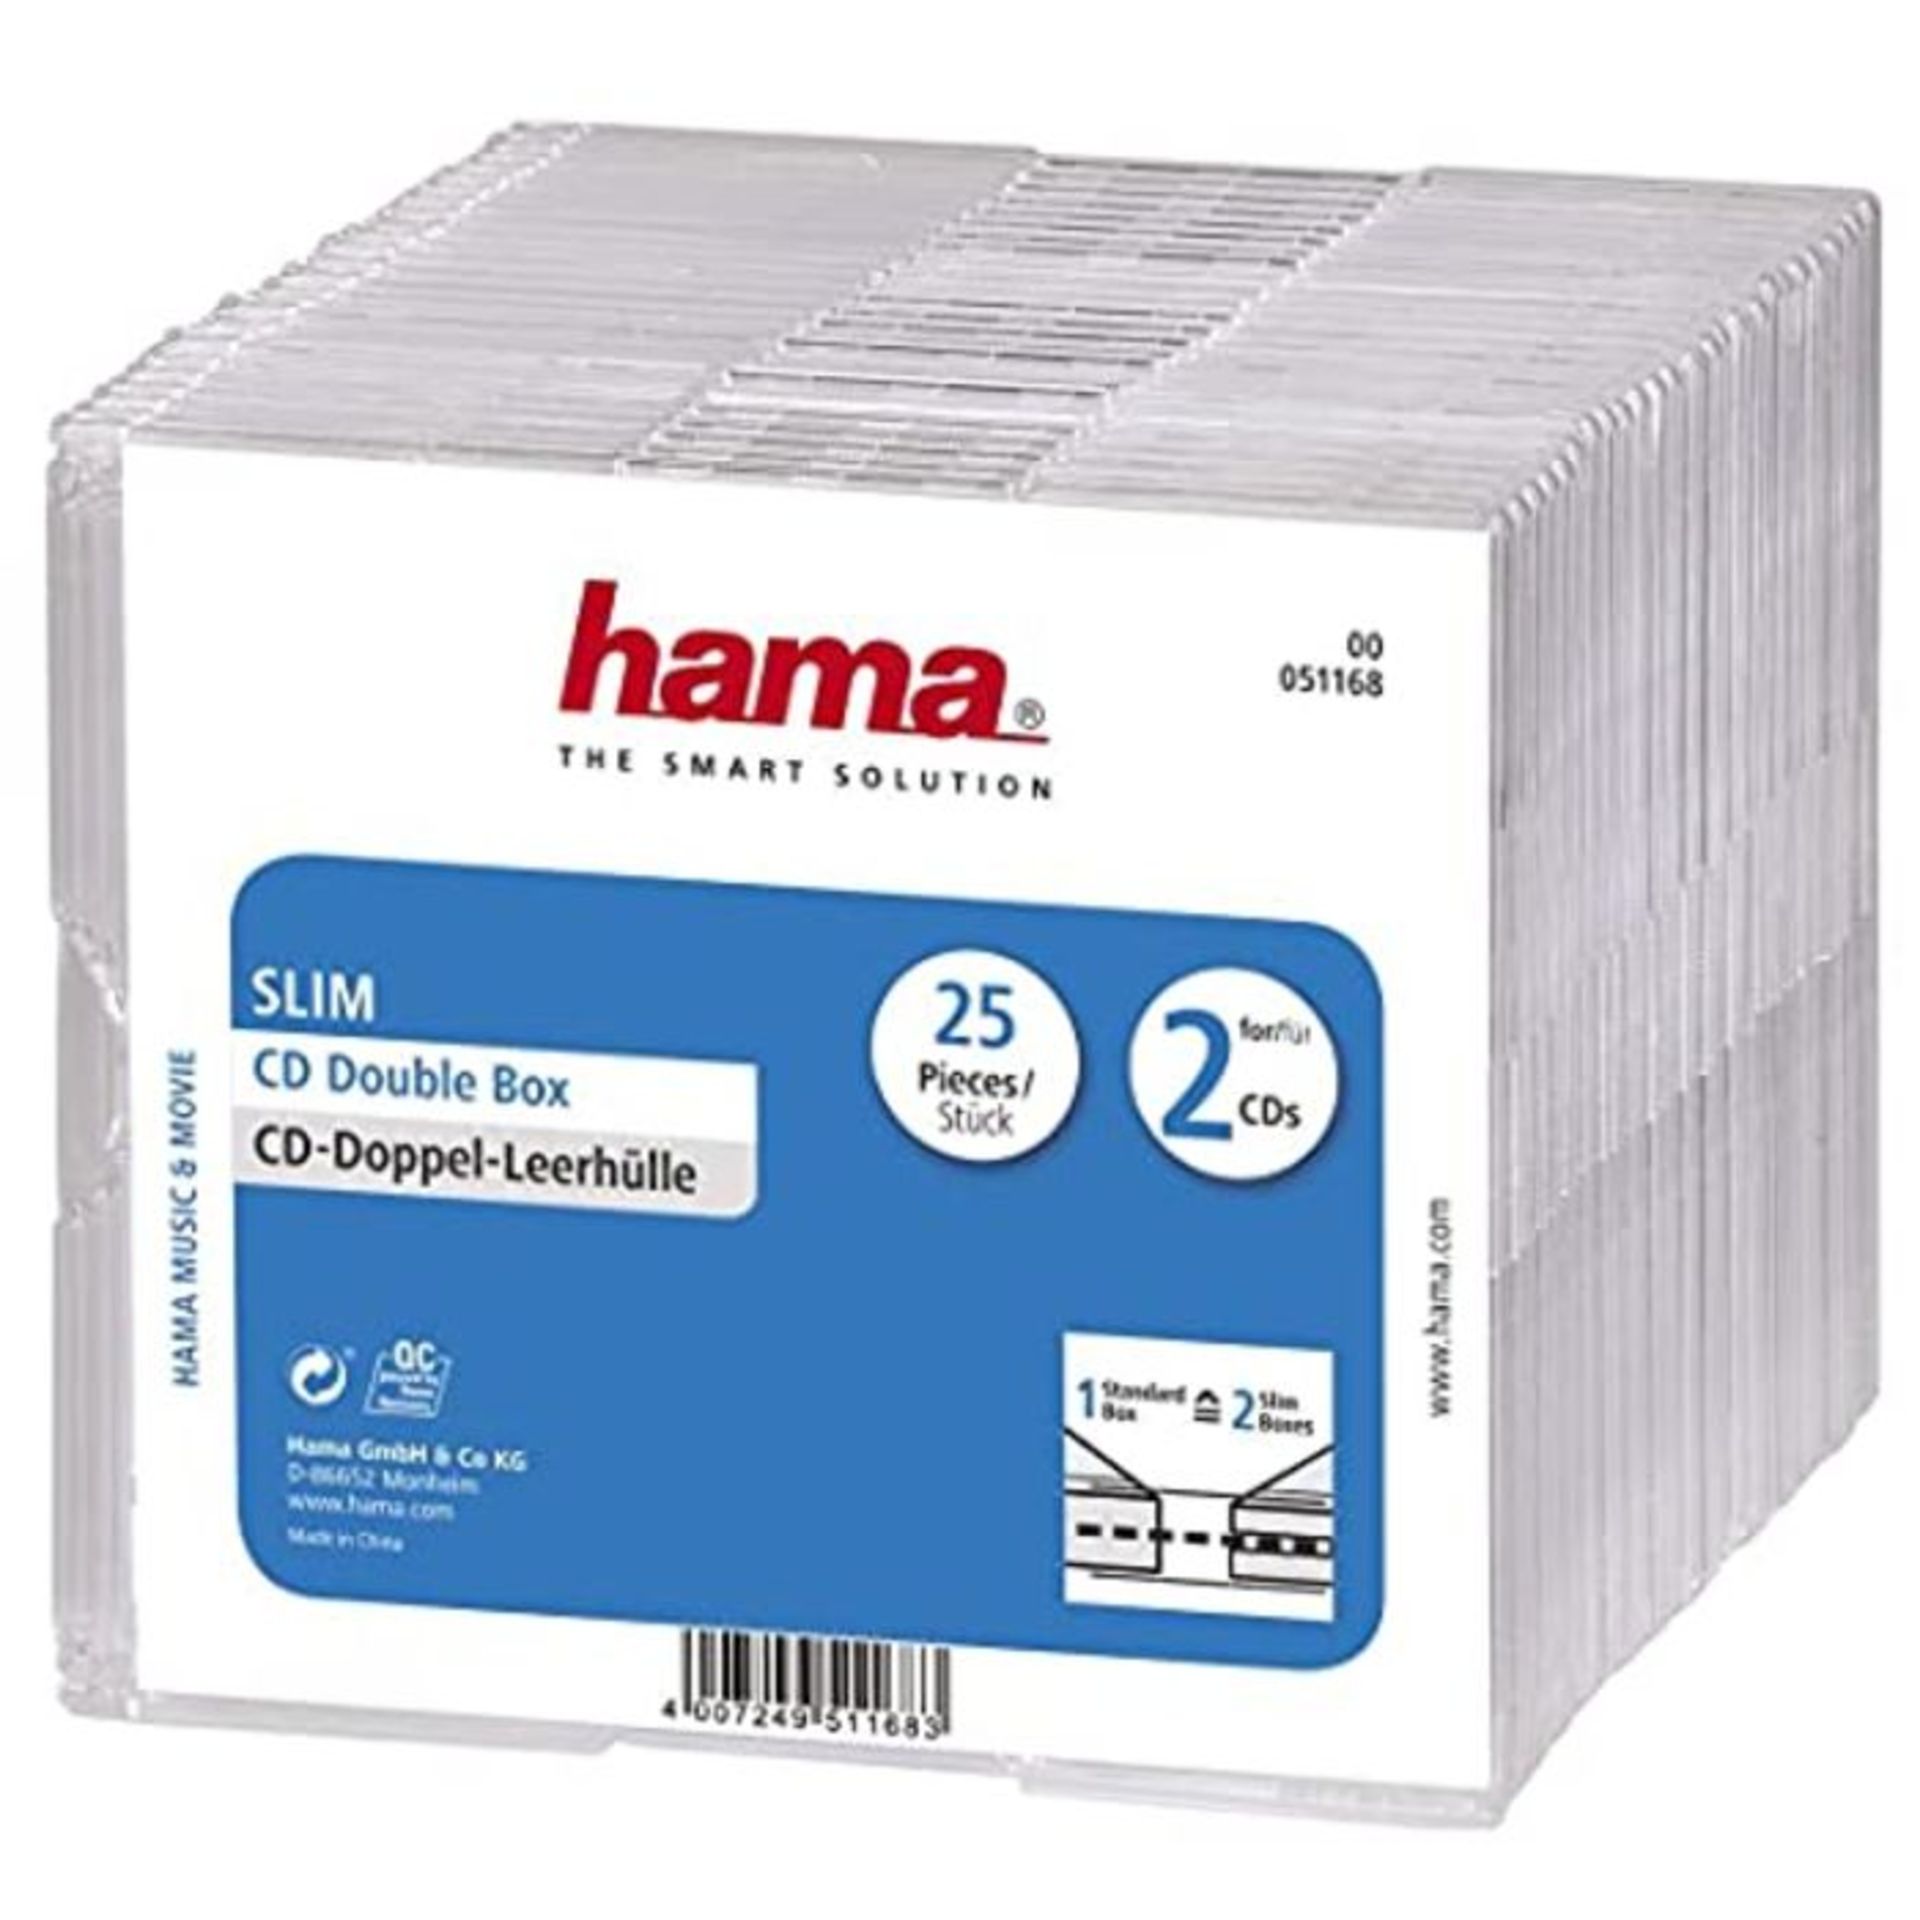 Hama 51168 Slim CD Double Cases Pack of 25 - Transparent